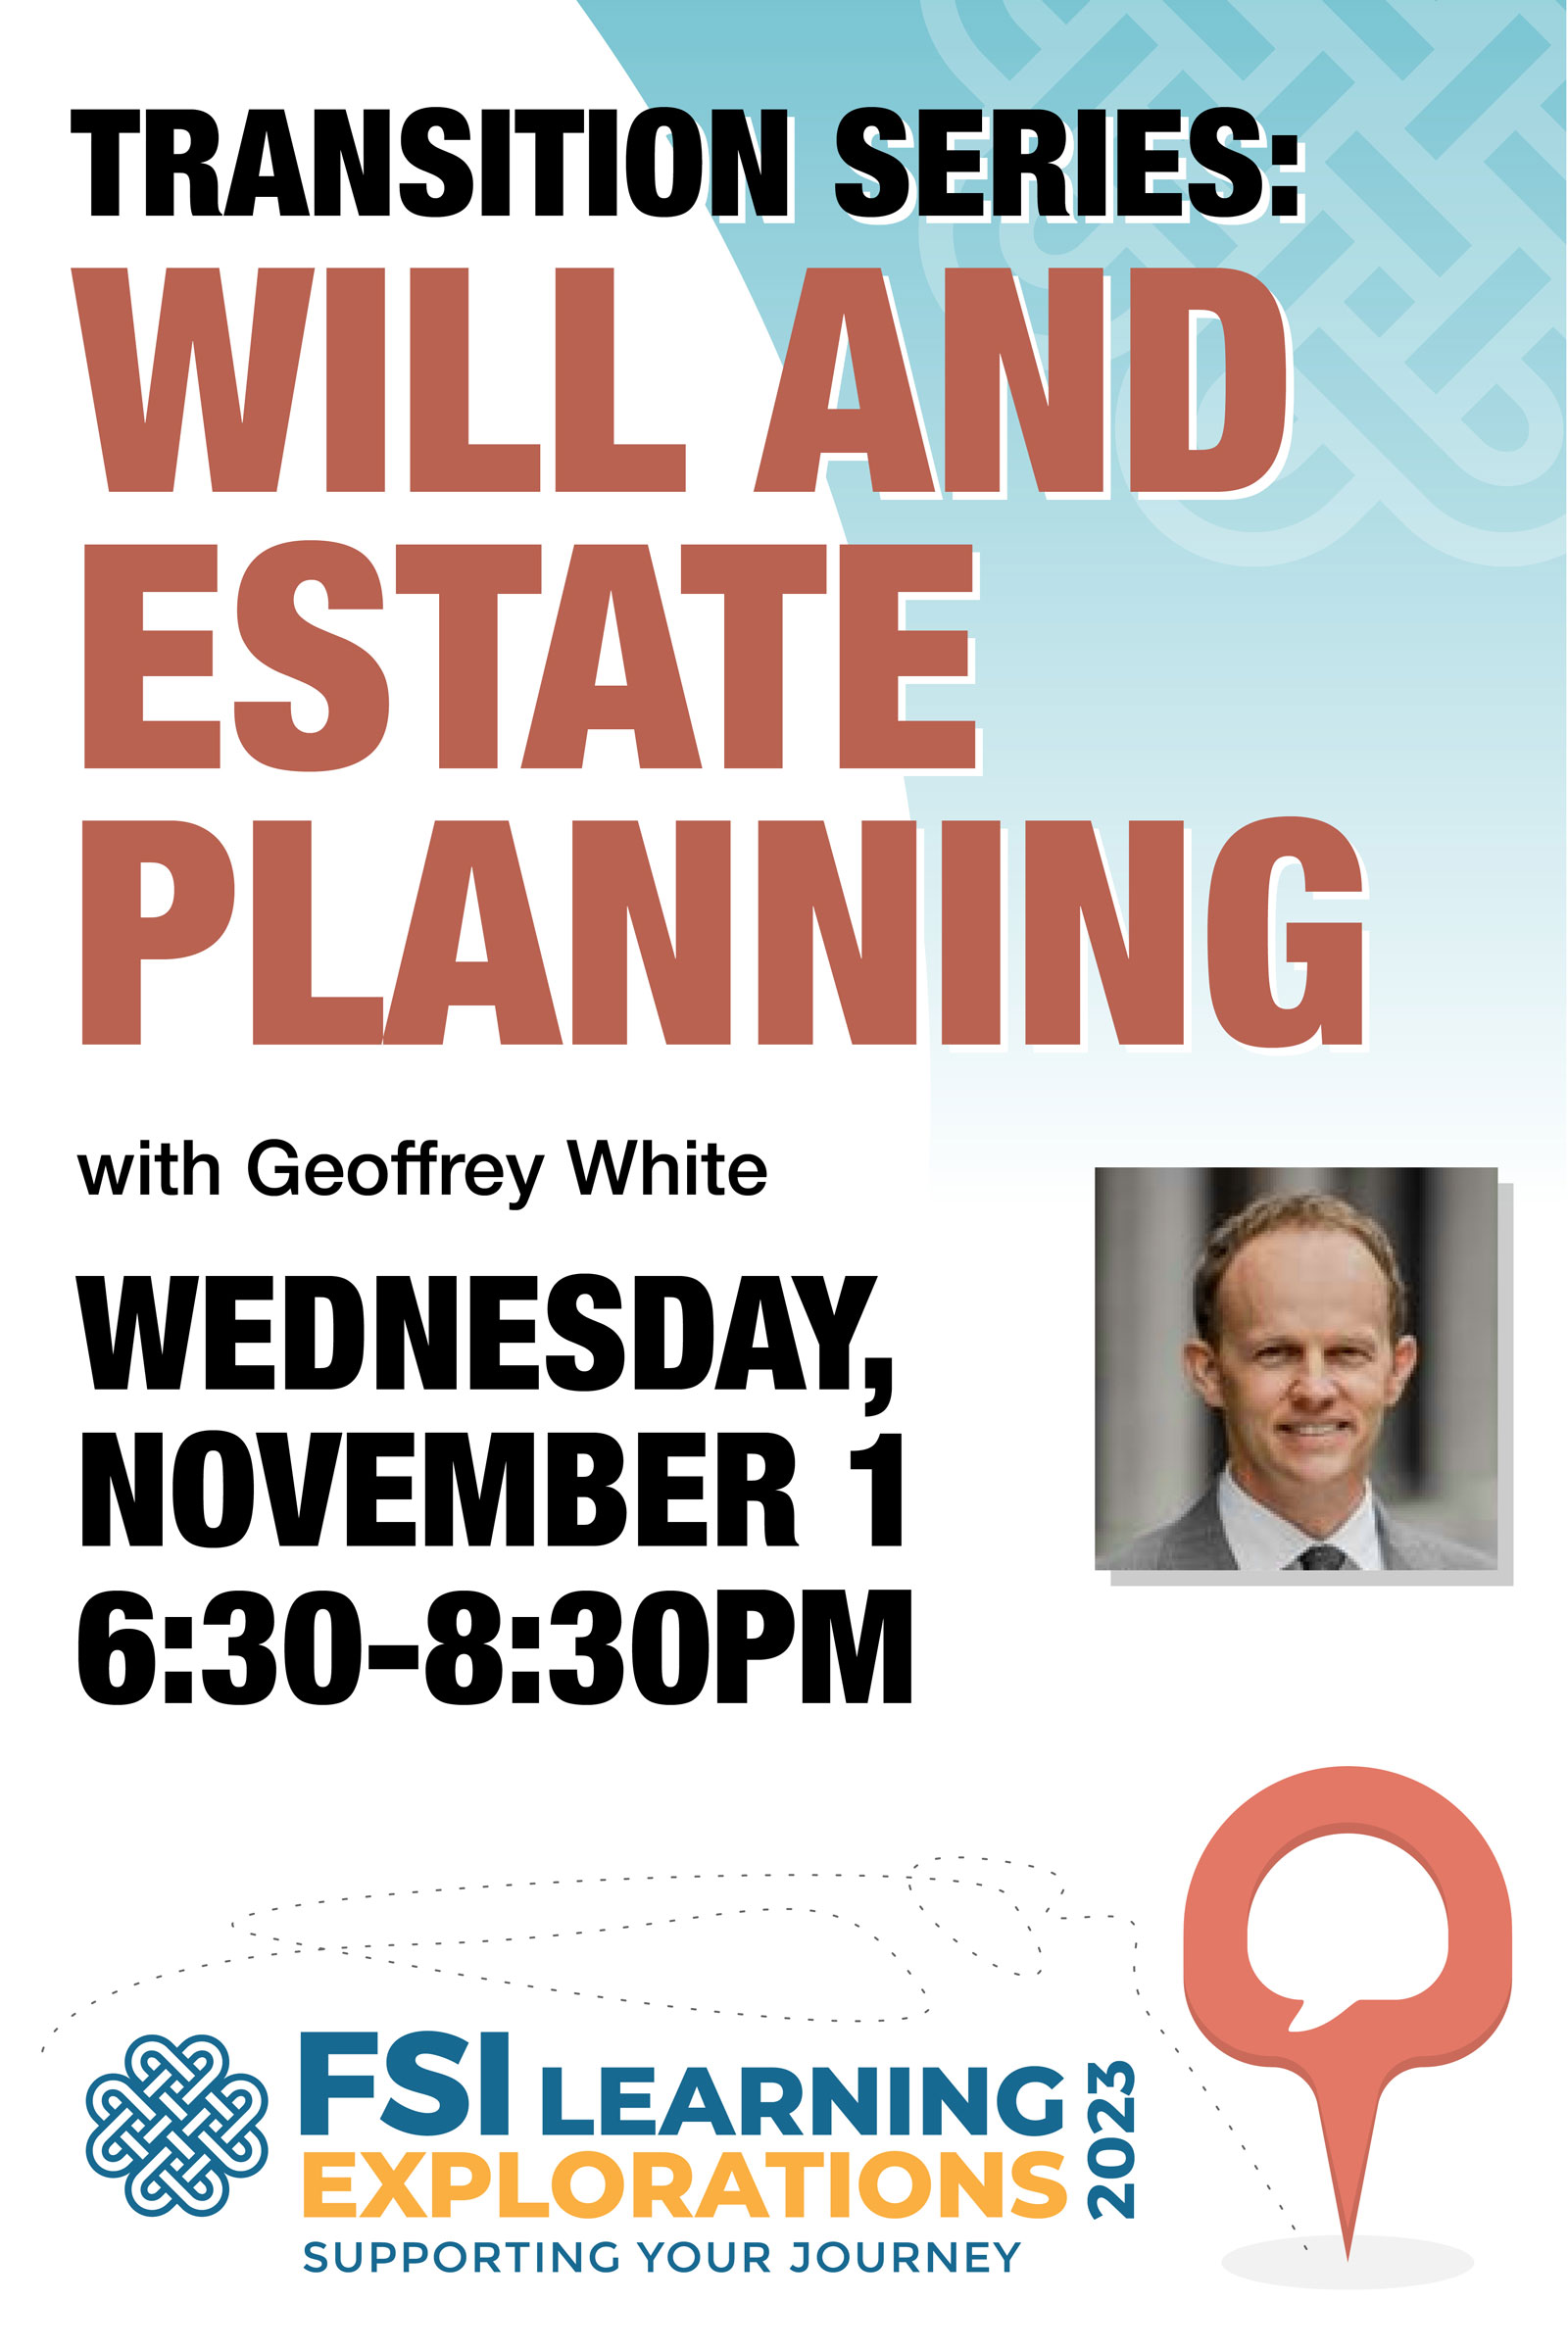 FSI Learning Explorations ~ Transition Series:  Wills and Estate Planning